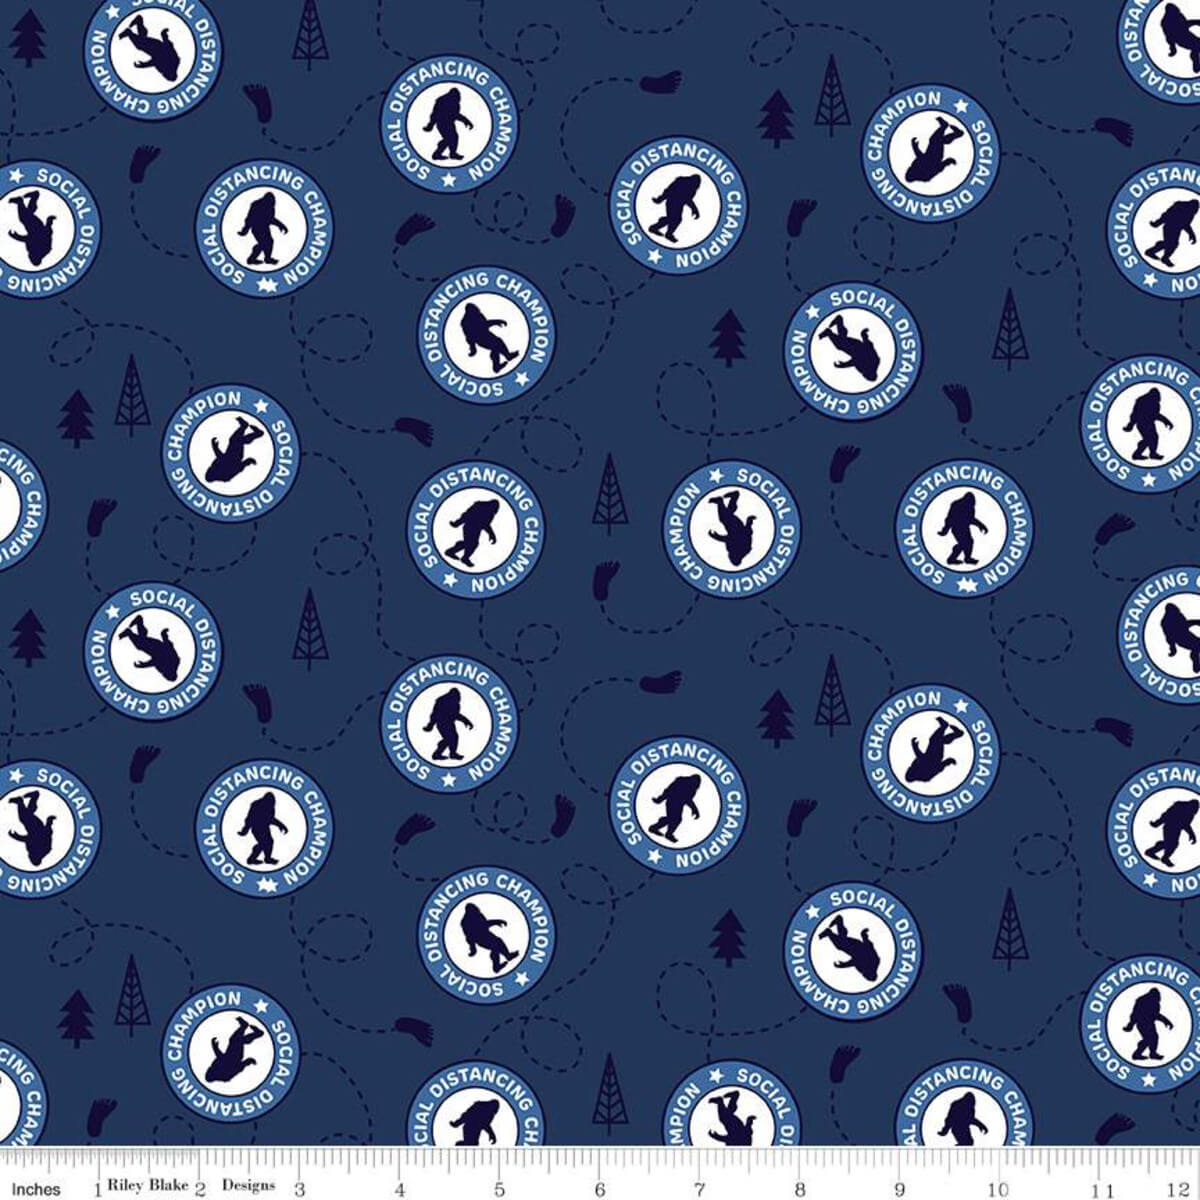 Face Mask Sasquatch Navy Fabric by the Yard available at Nancy Zieman Productions ShopNZP.com